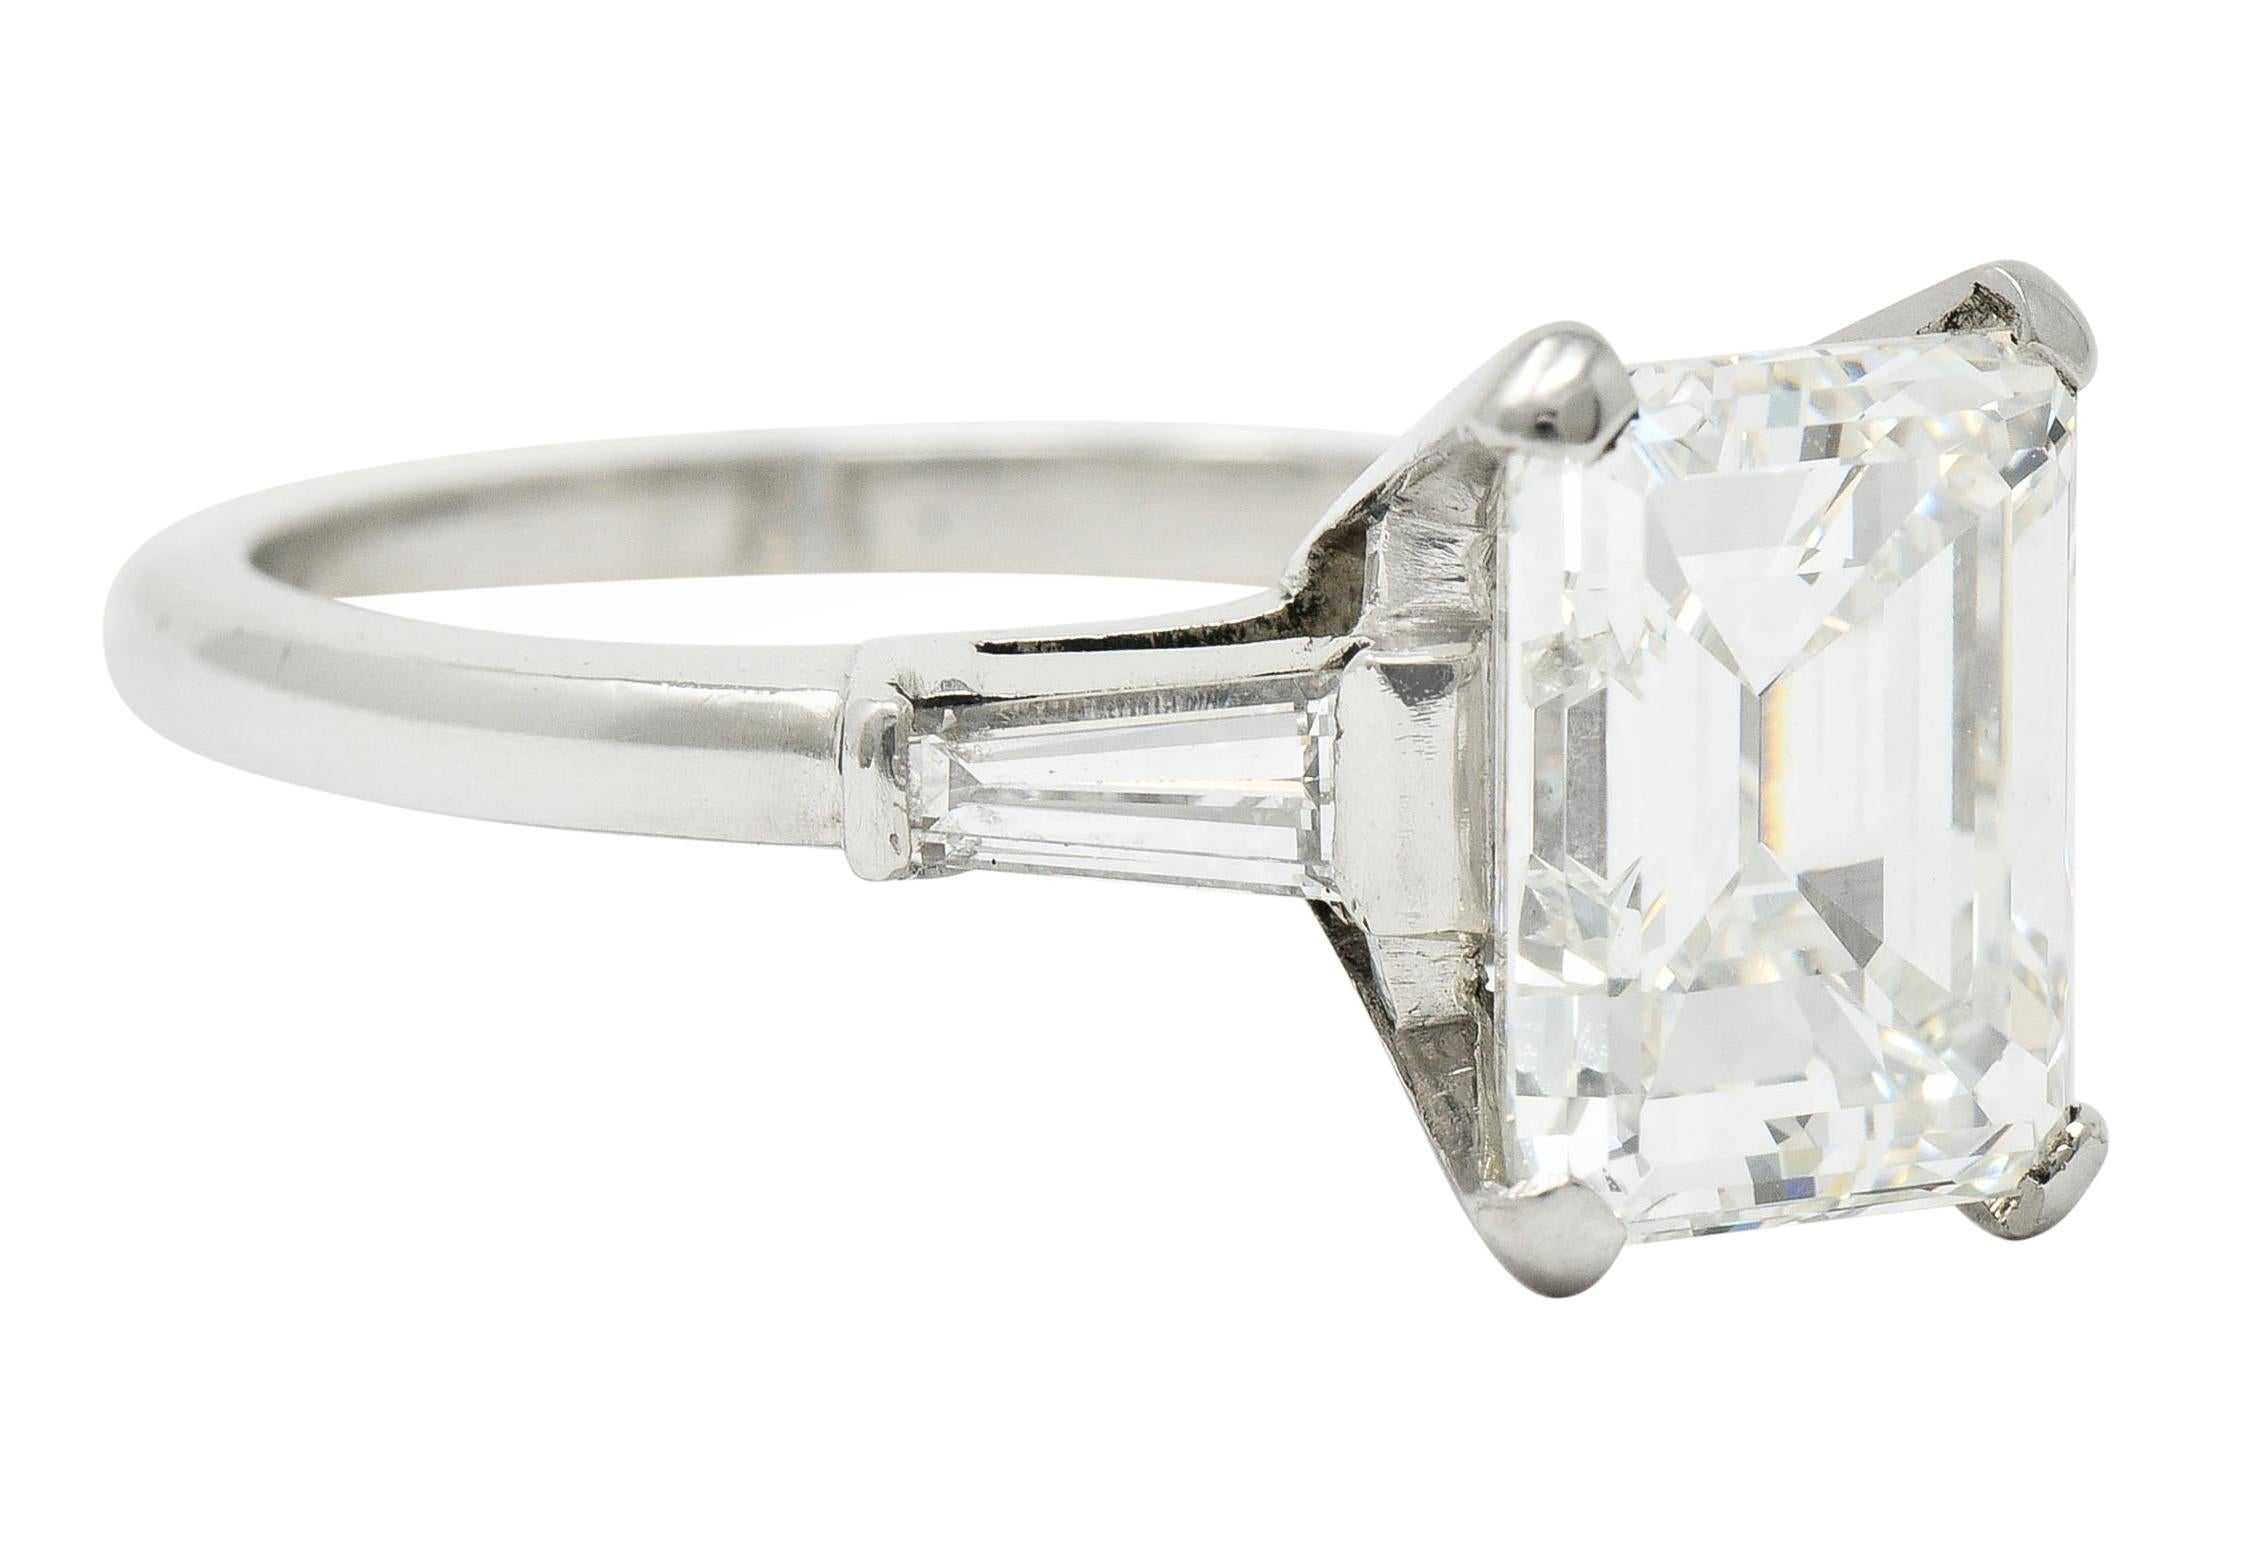 Centering an emerald cut diamond weighing 3.80 carats with I color and VS1 clarity

Basket set and flanked by tapered baguette cut diamonds

Weighing in total approximately 0.32 carat and well-matched to center

Stamped for platinum

Circa: